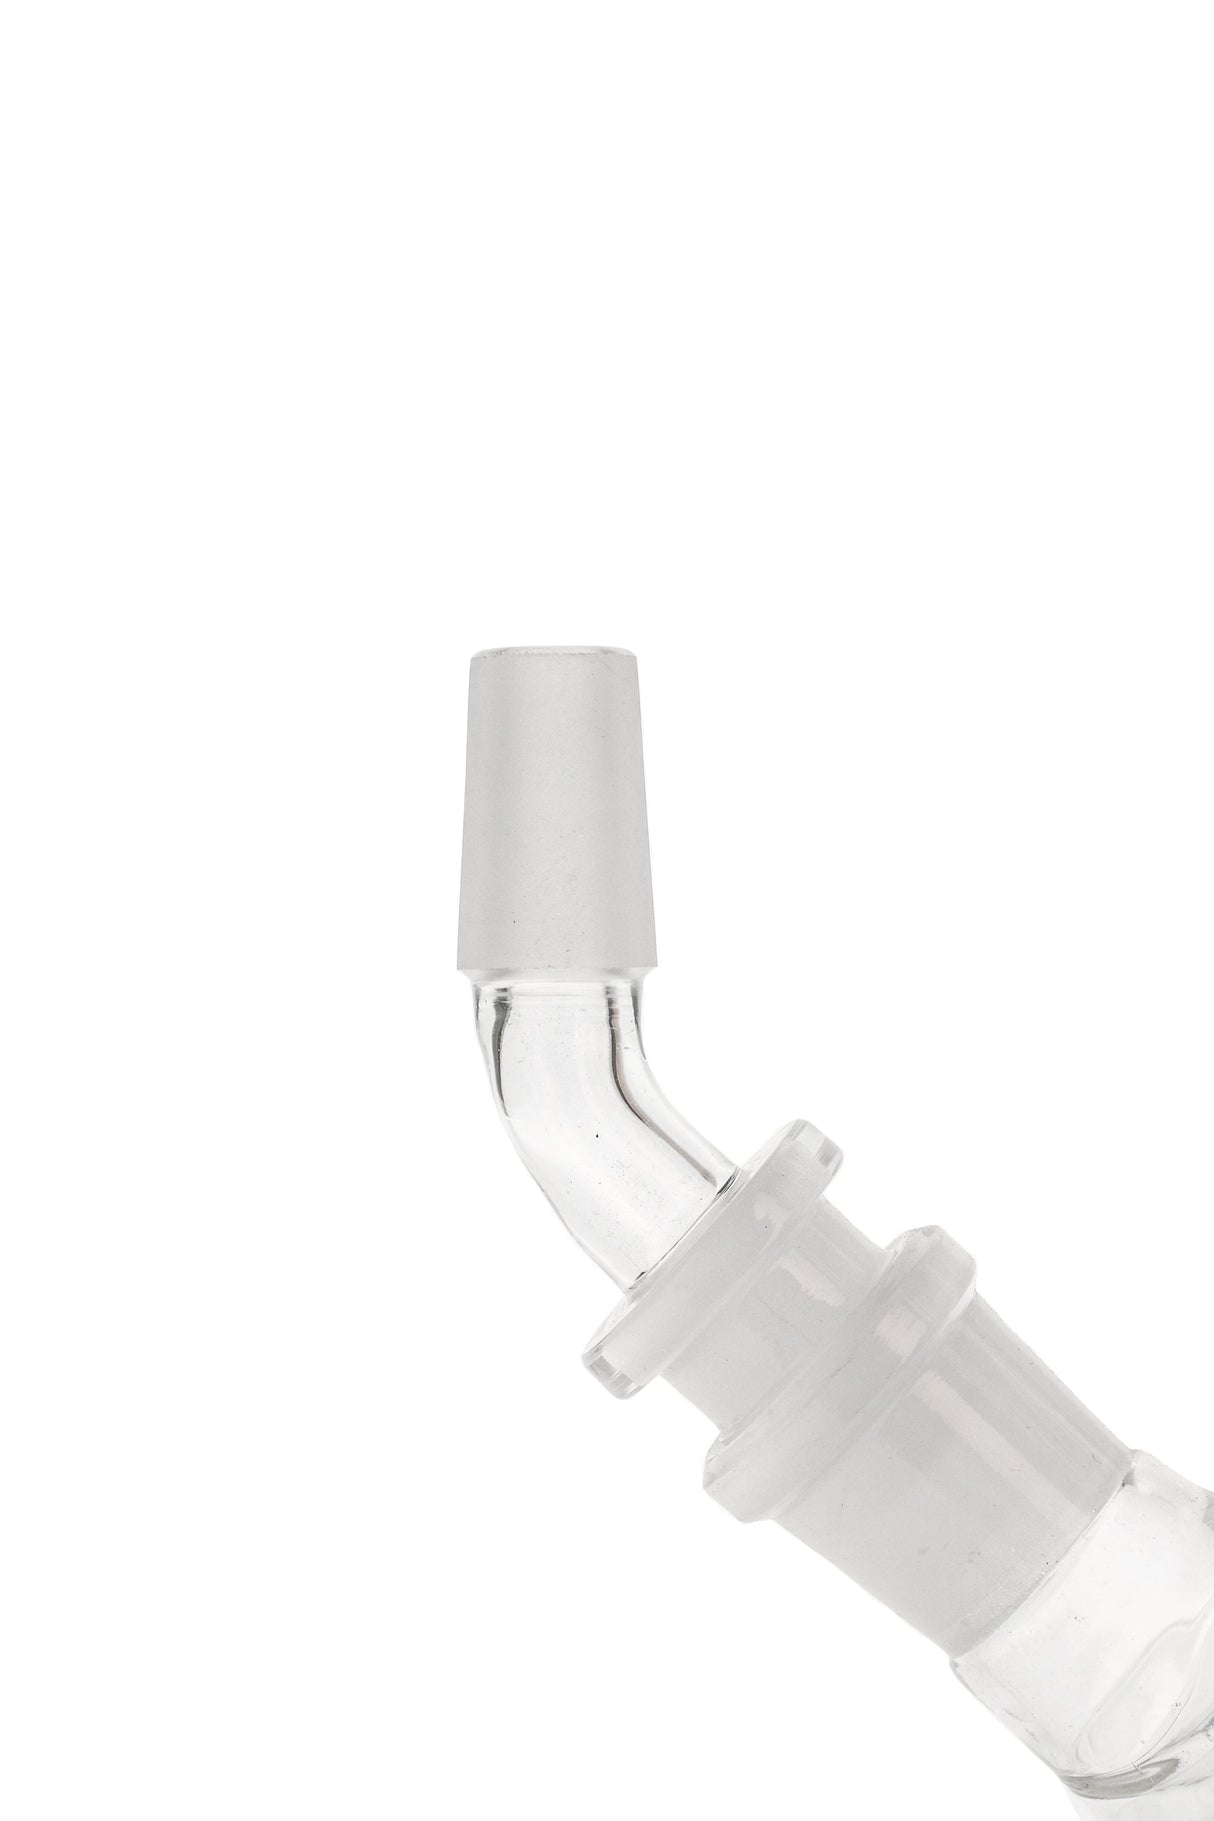 TAG - Thick Ass Glass Angle Adapter for Bongs, Clear Quartz, Side View